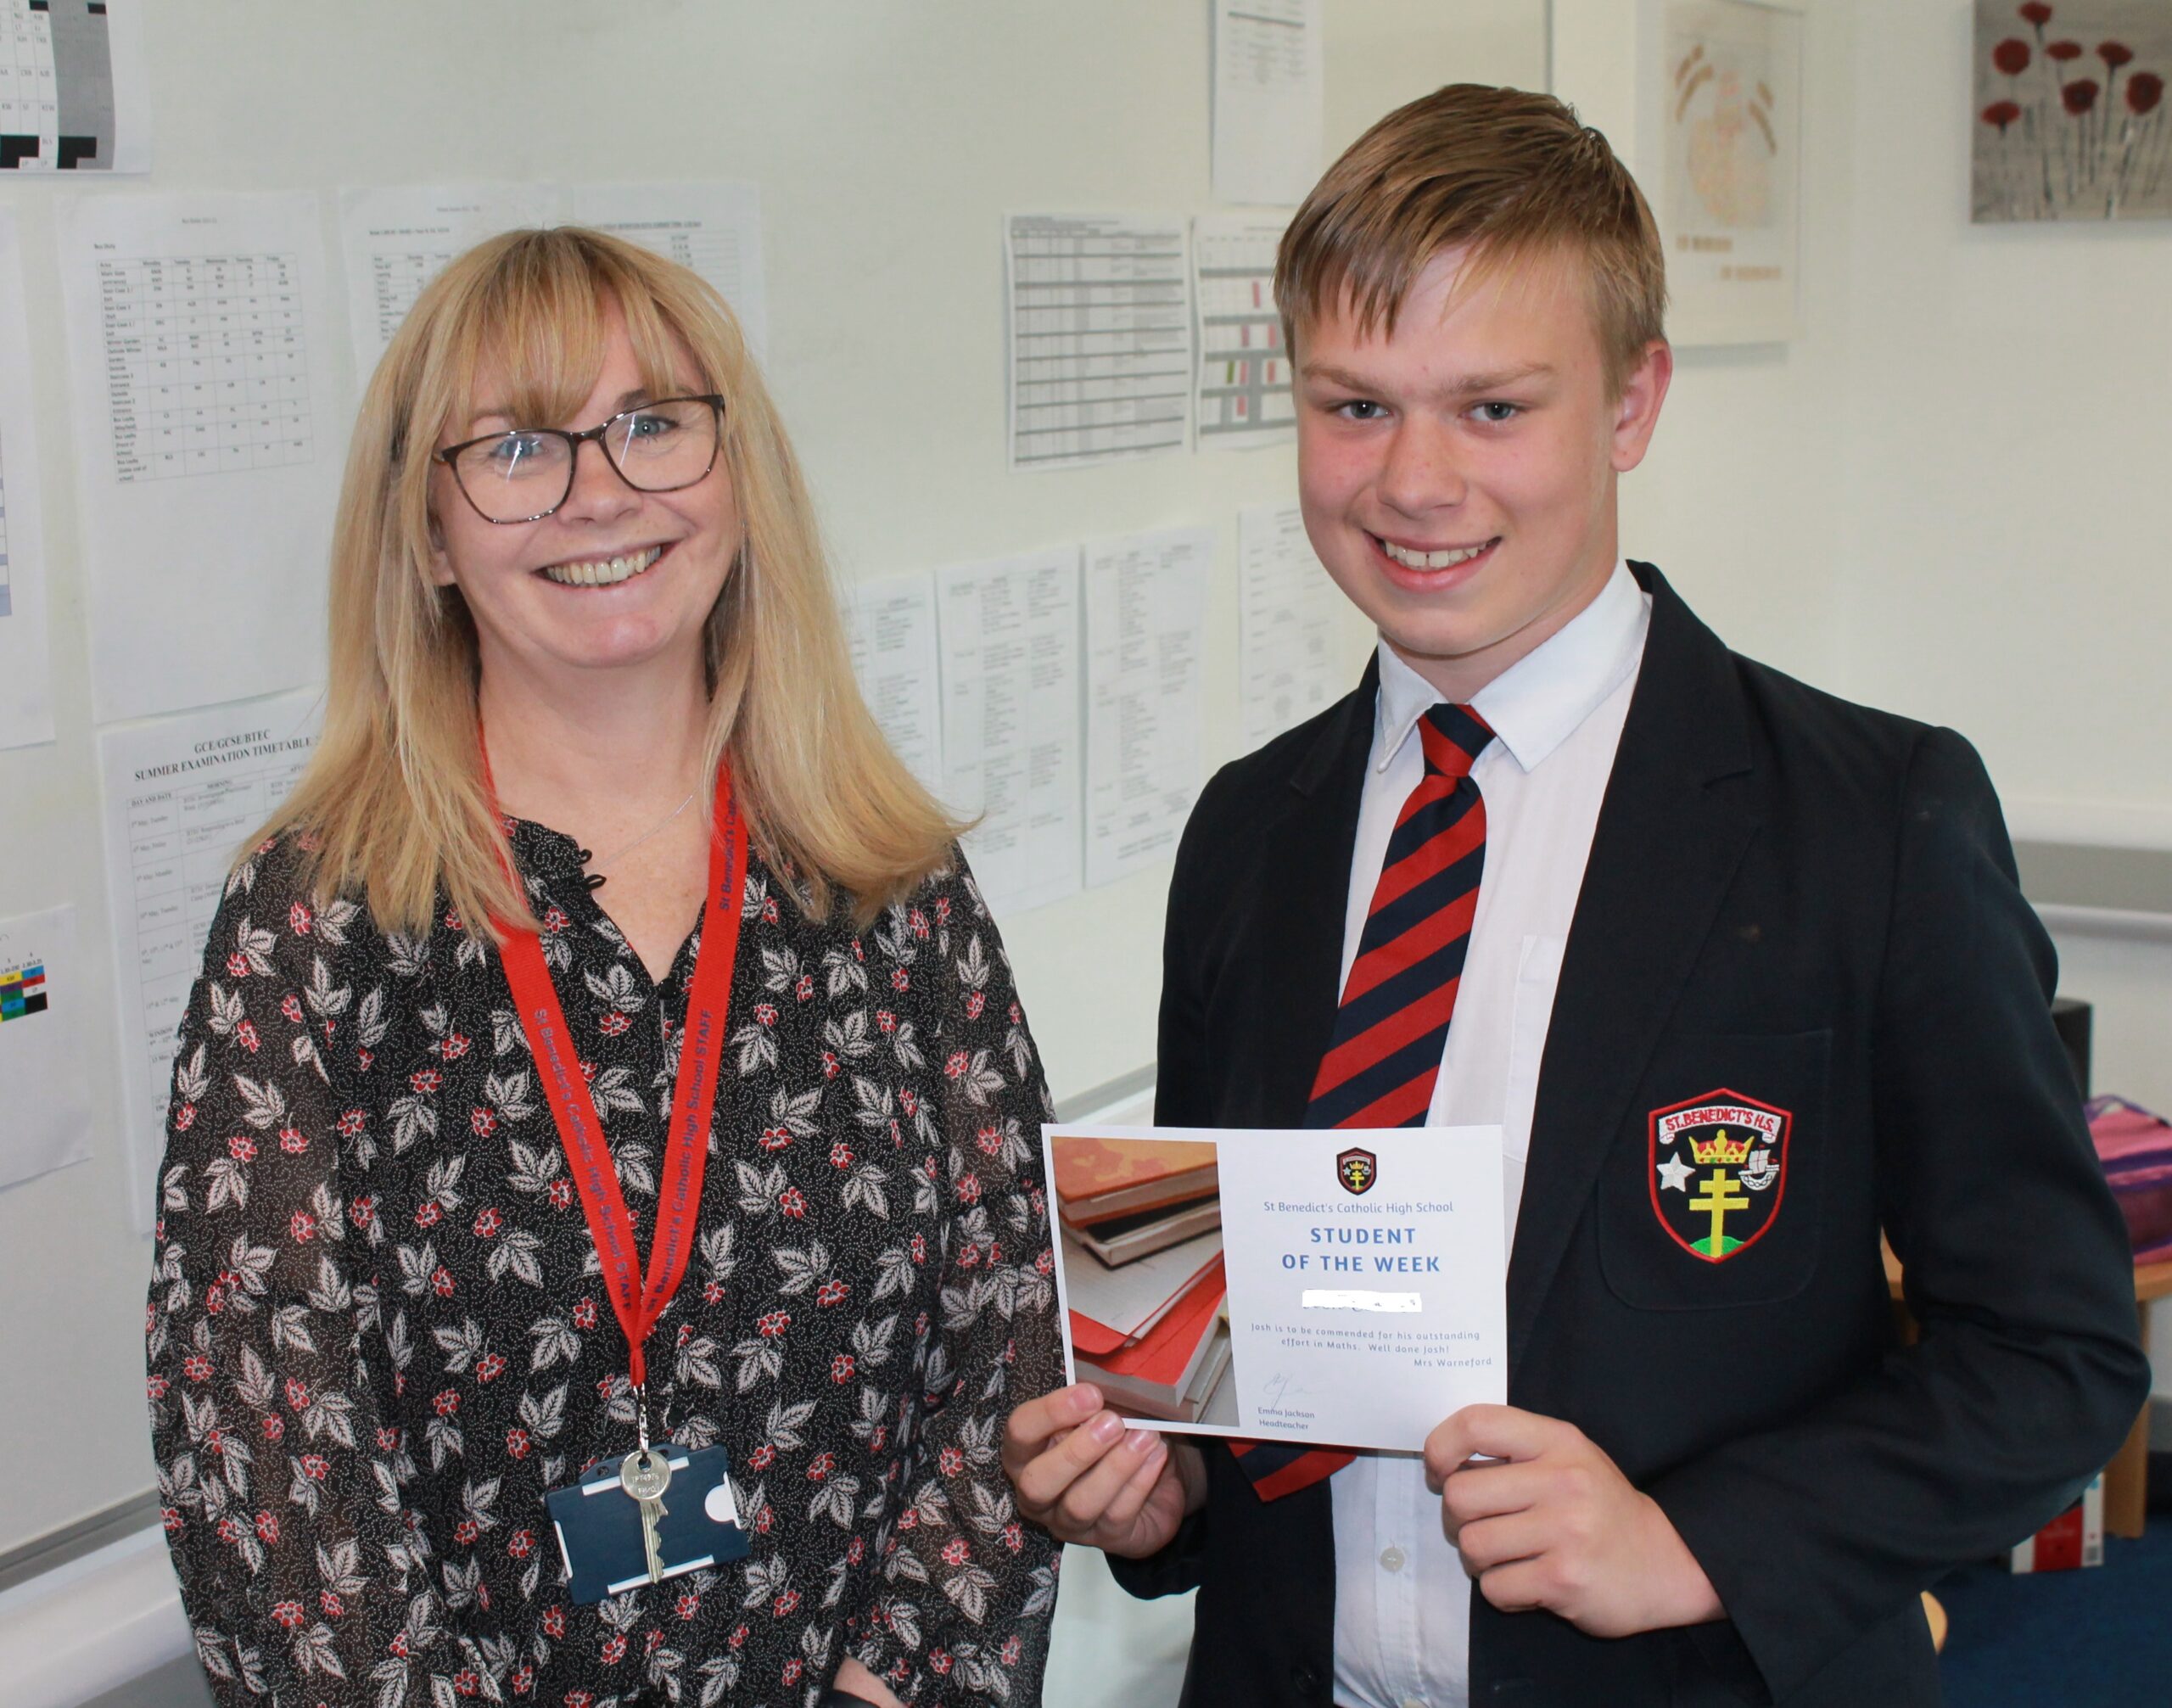 Student of the Week – 13th June